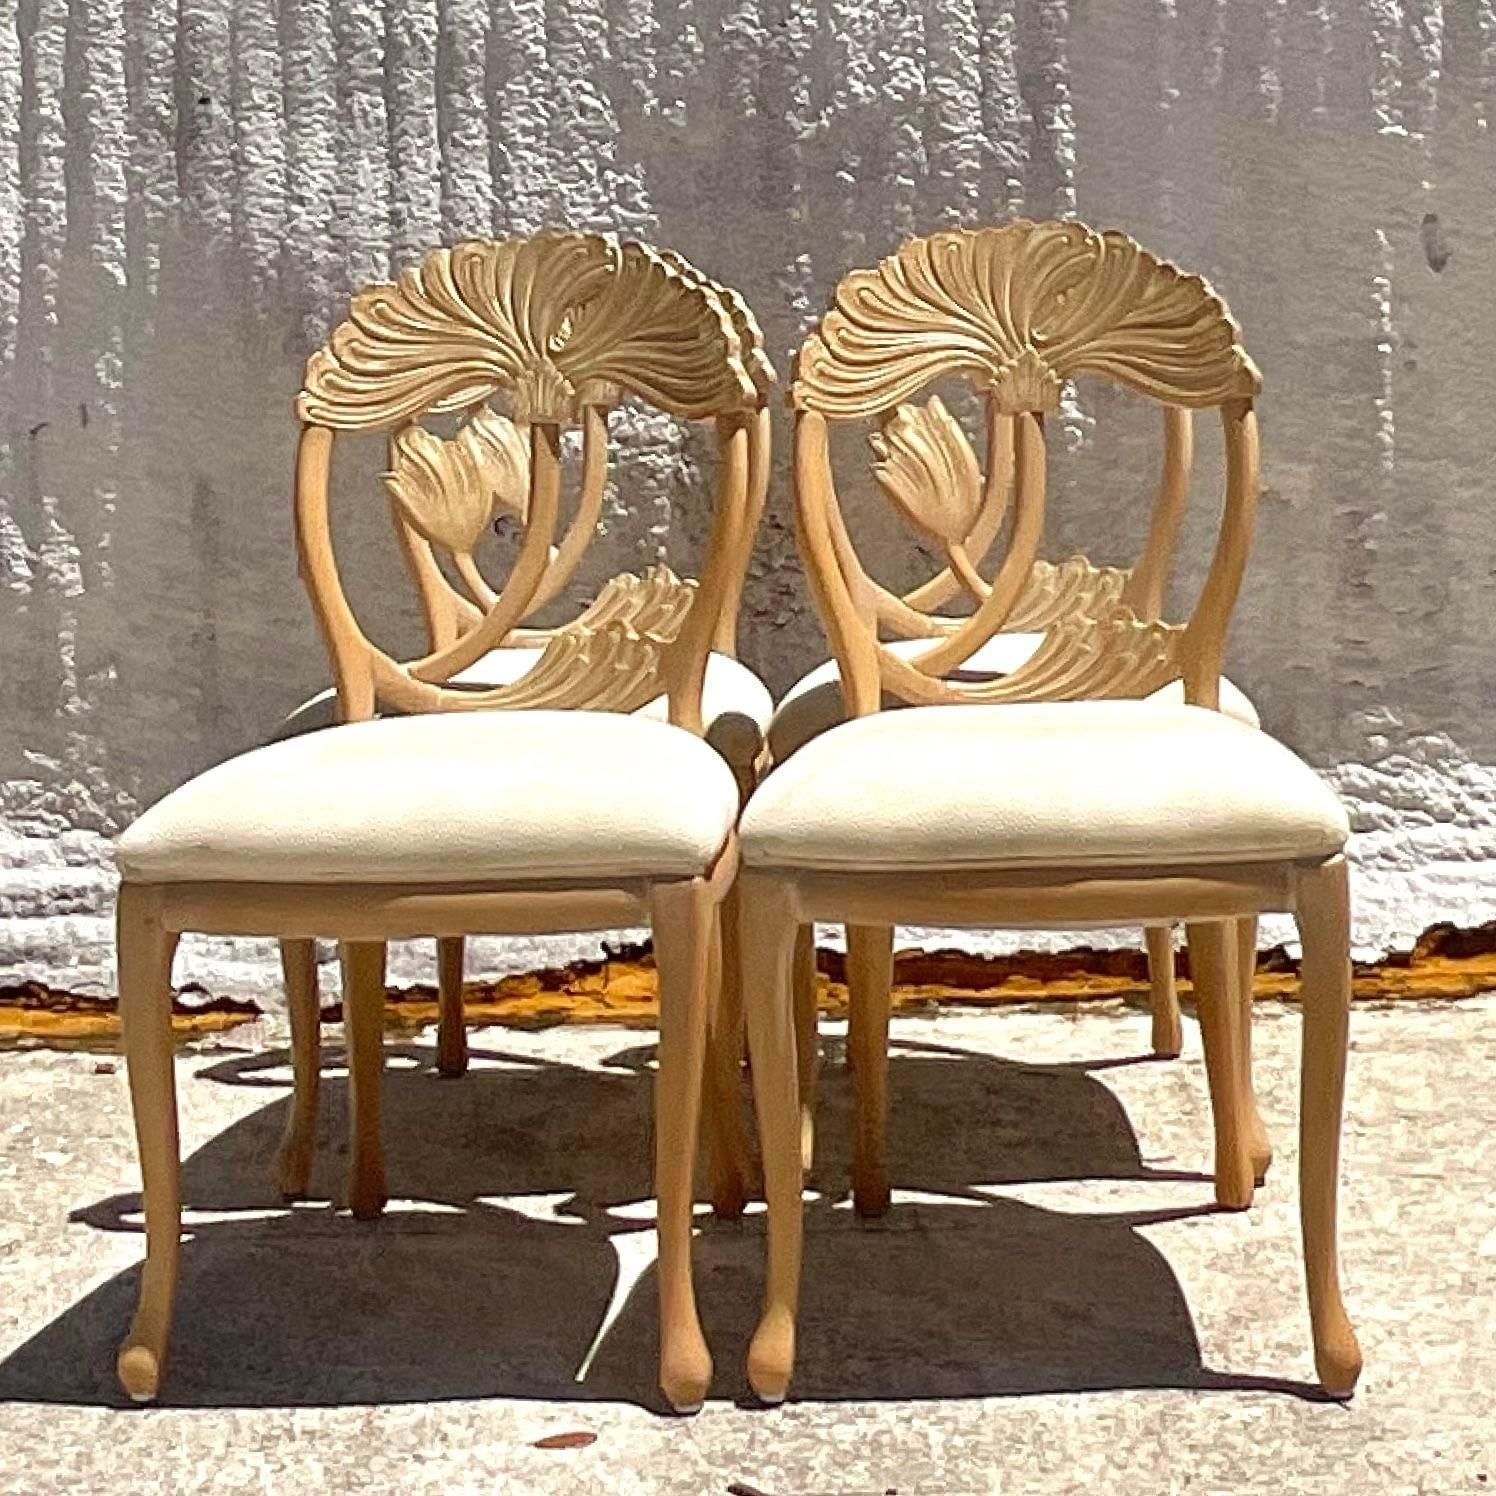 Ash Vintage Boho Carved Lotus Blossom Dining Chairs - Set of 4 For Sale